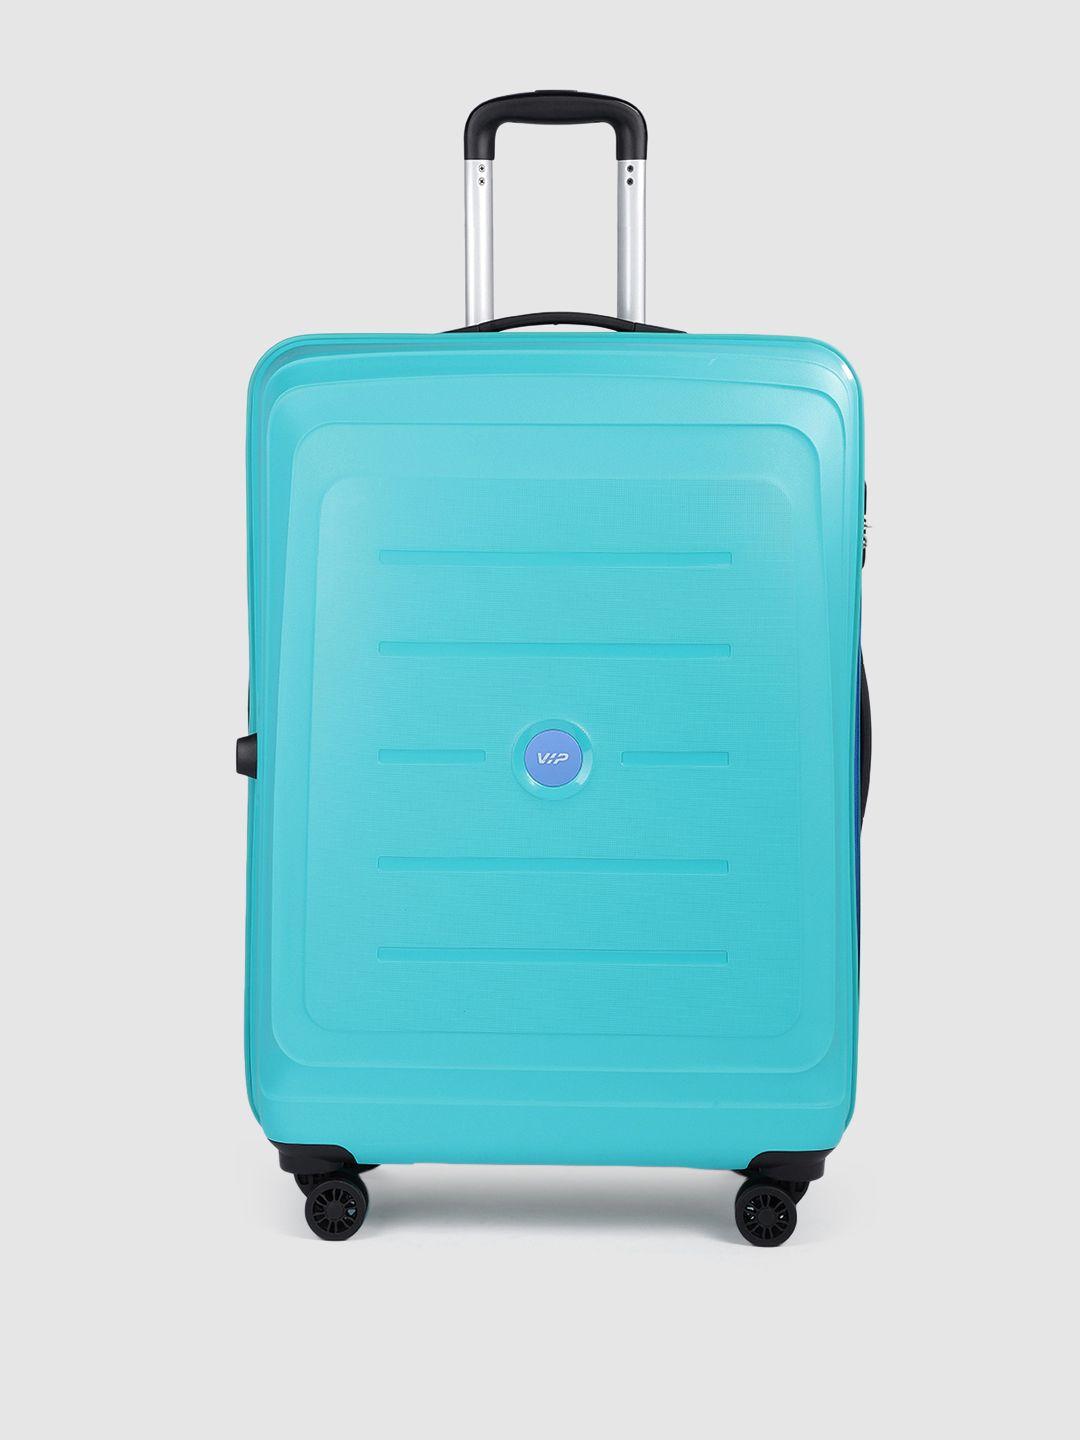 vip corsa strolly 76 360 textured large trolley suitcase